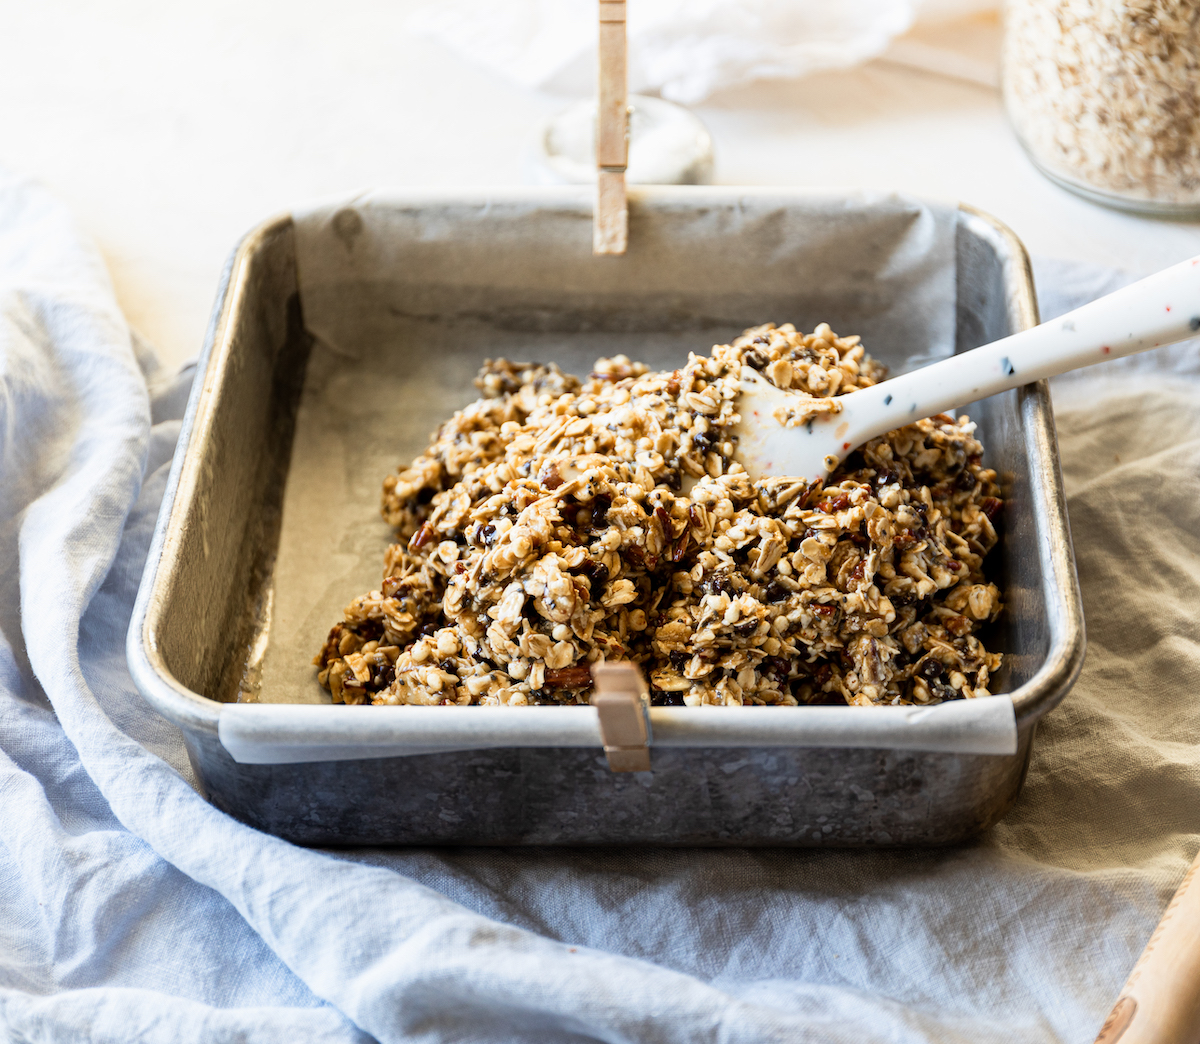 A baking dish with unbaked granola in it.